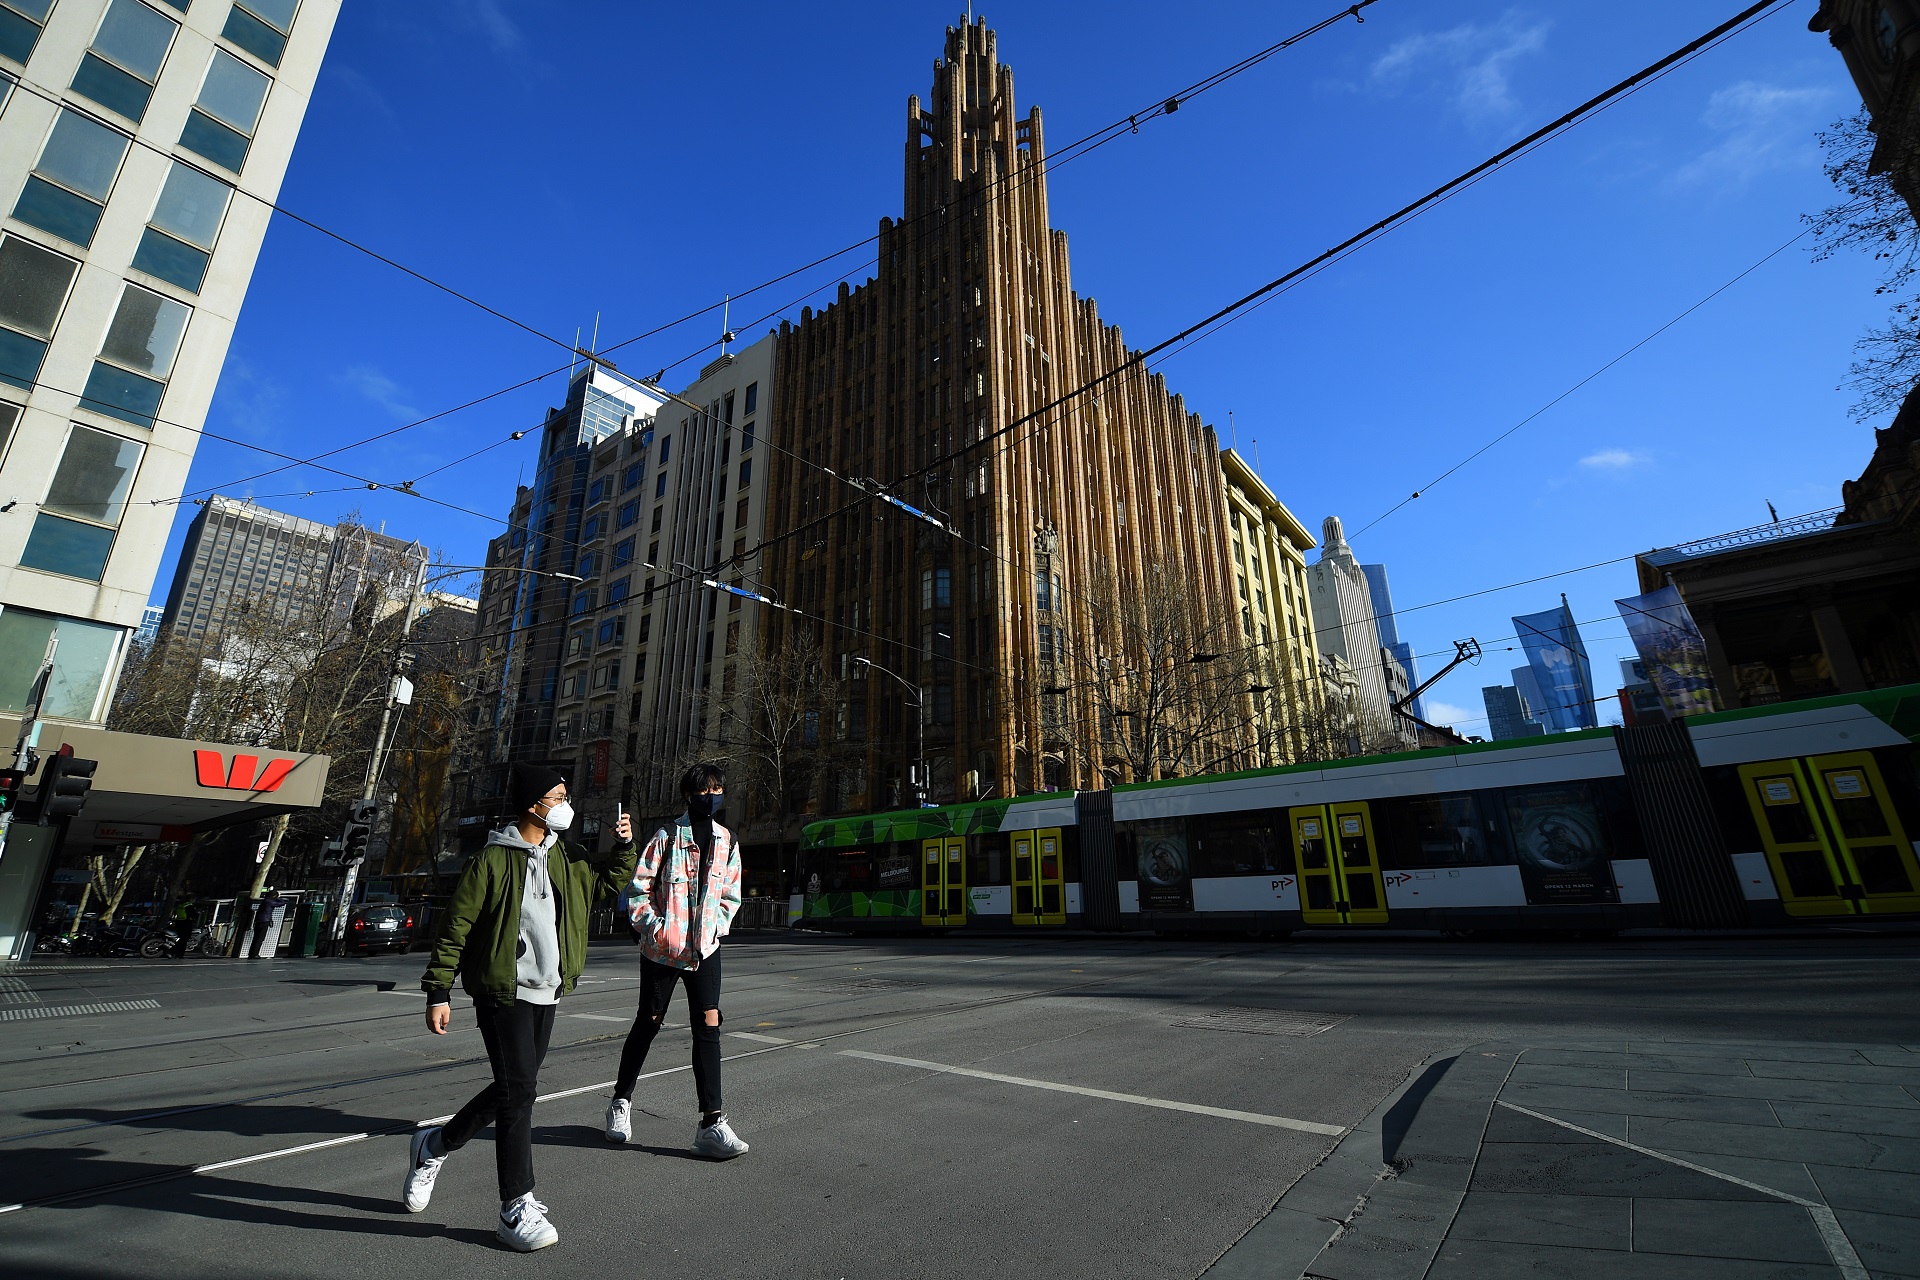 epa08594554 People walk in the central business district of Melbourne, Australia, 10 August 2020. An 8pm to 5am curfew was enforced in Melbourne with people being asked to remain within a five-kilometer radius of their homes.  EPA/JAMES ROSS AUSTRALIA AND NEW ZEALAND OUT